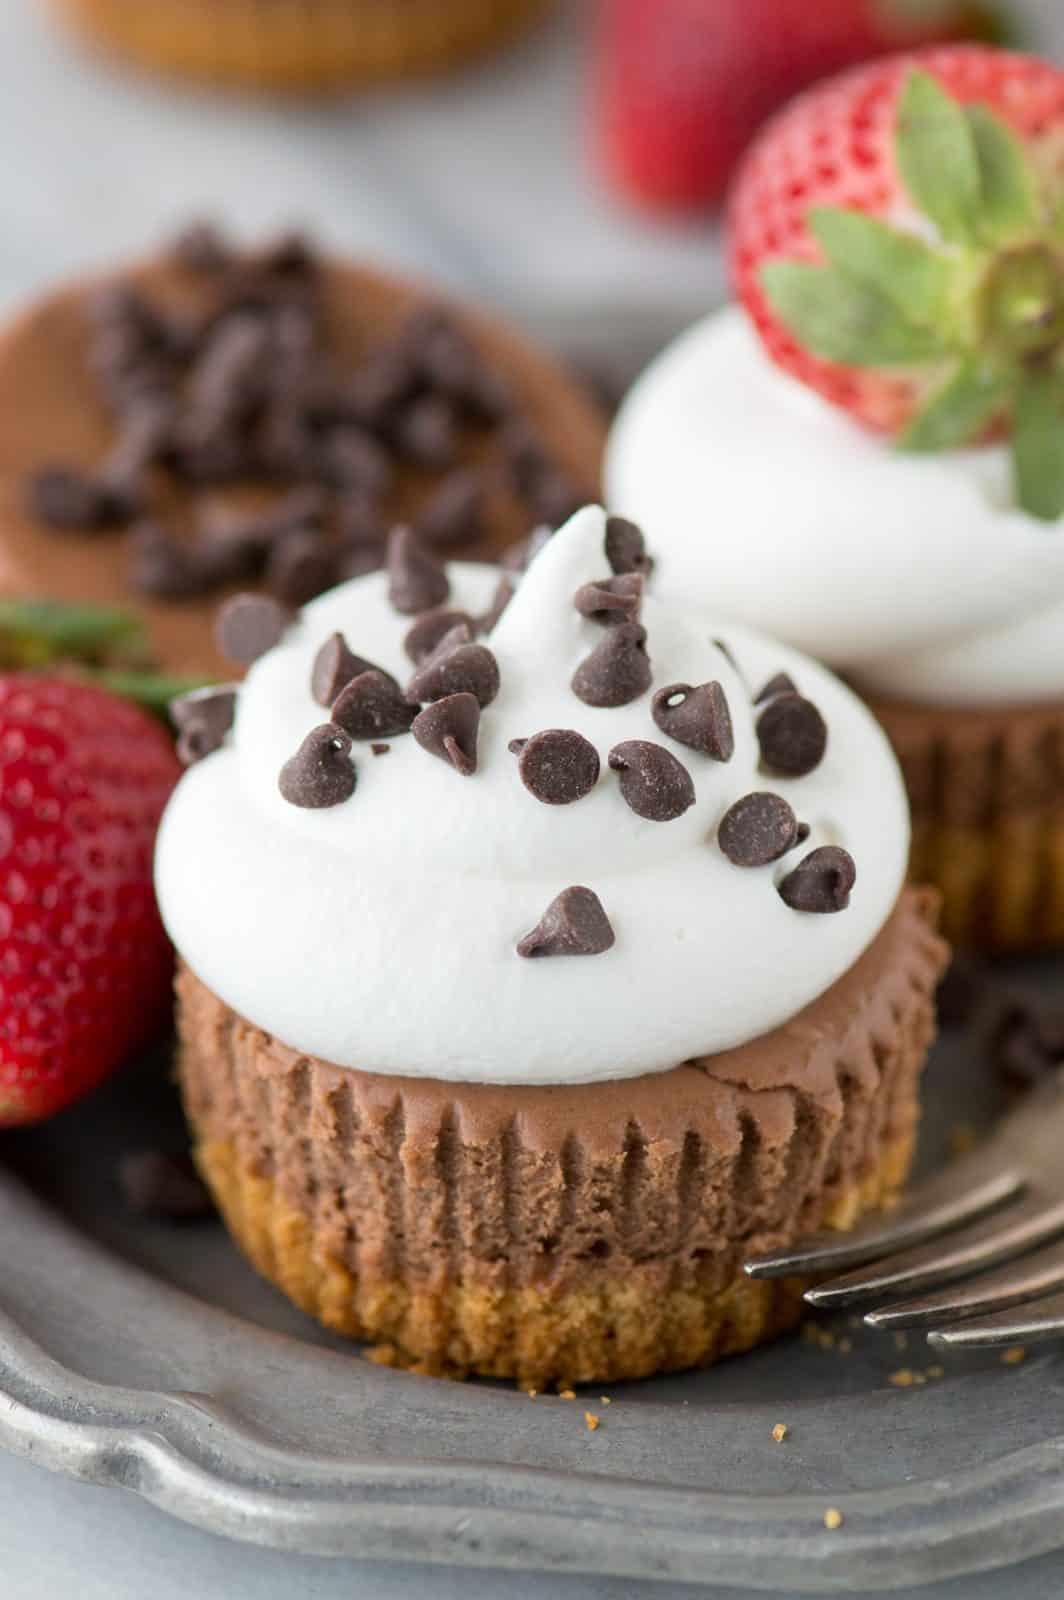 These mini chocolate cheesecakes are paired with a graham cracker crust and take just 15 minutes to bake!